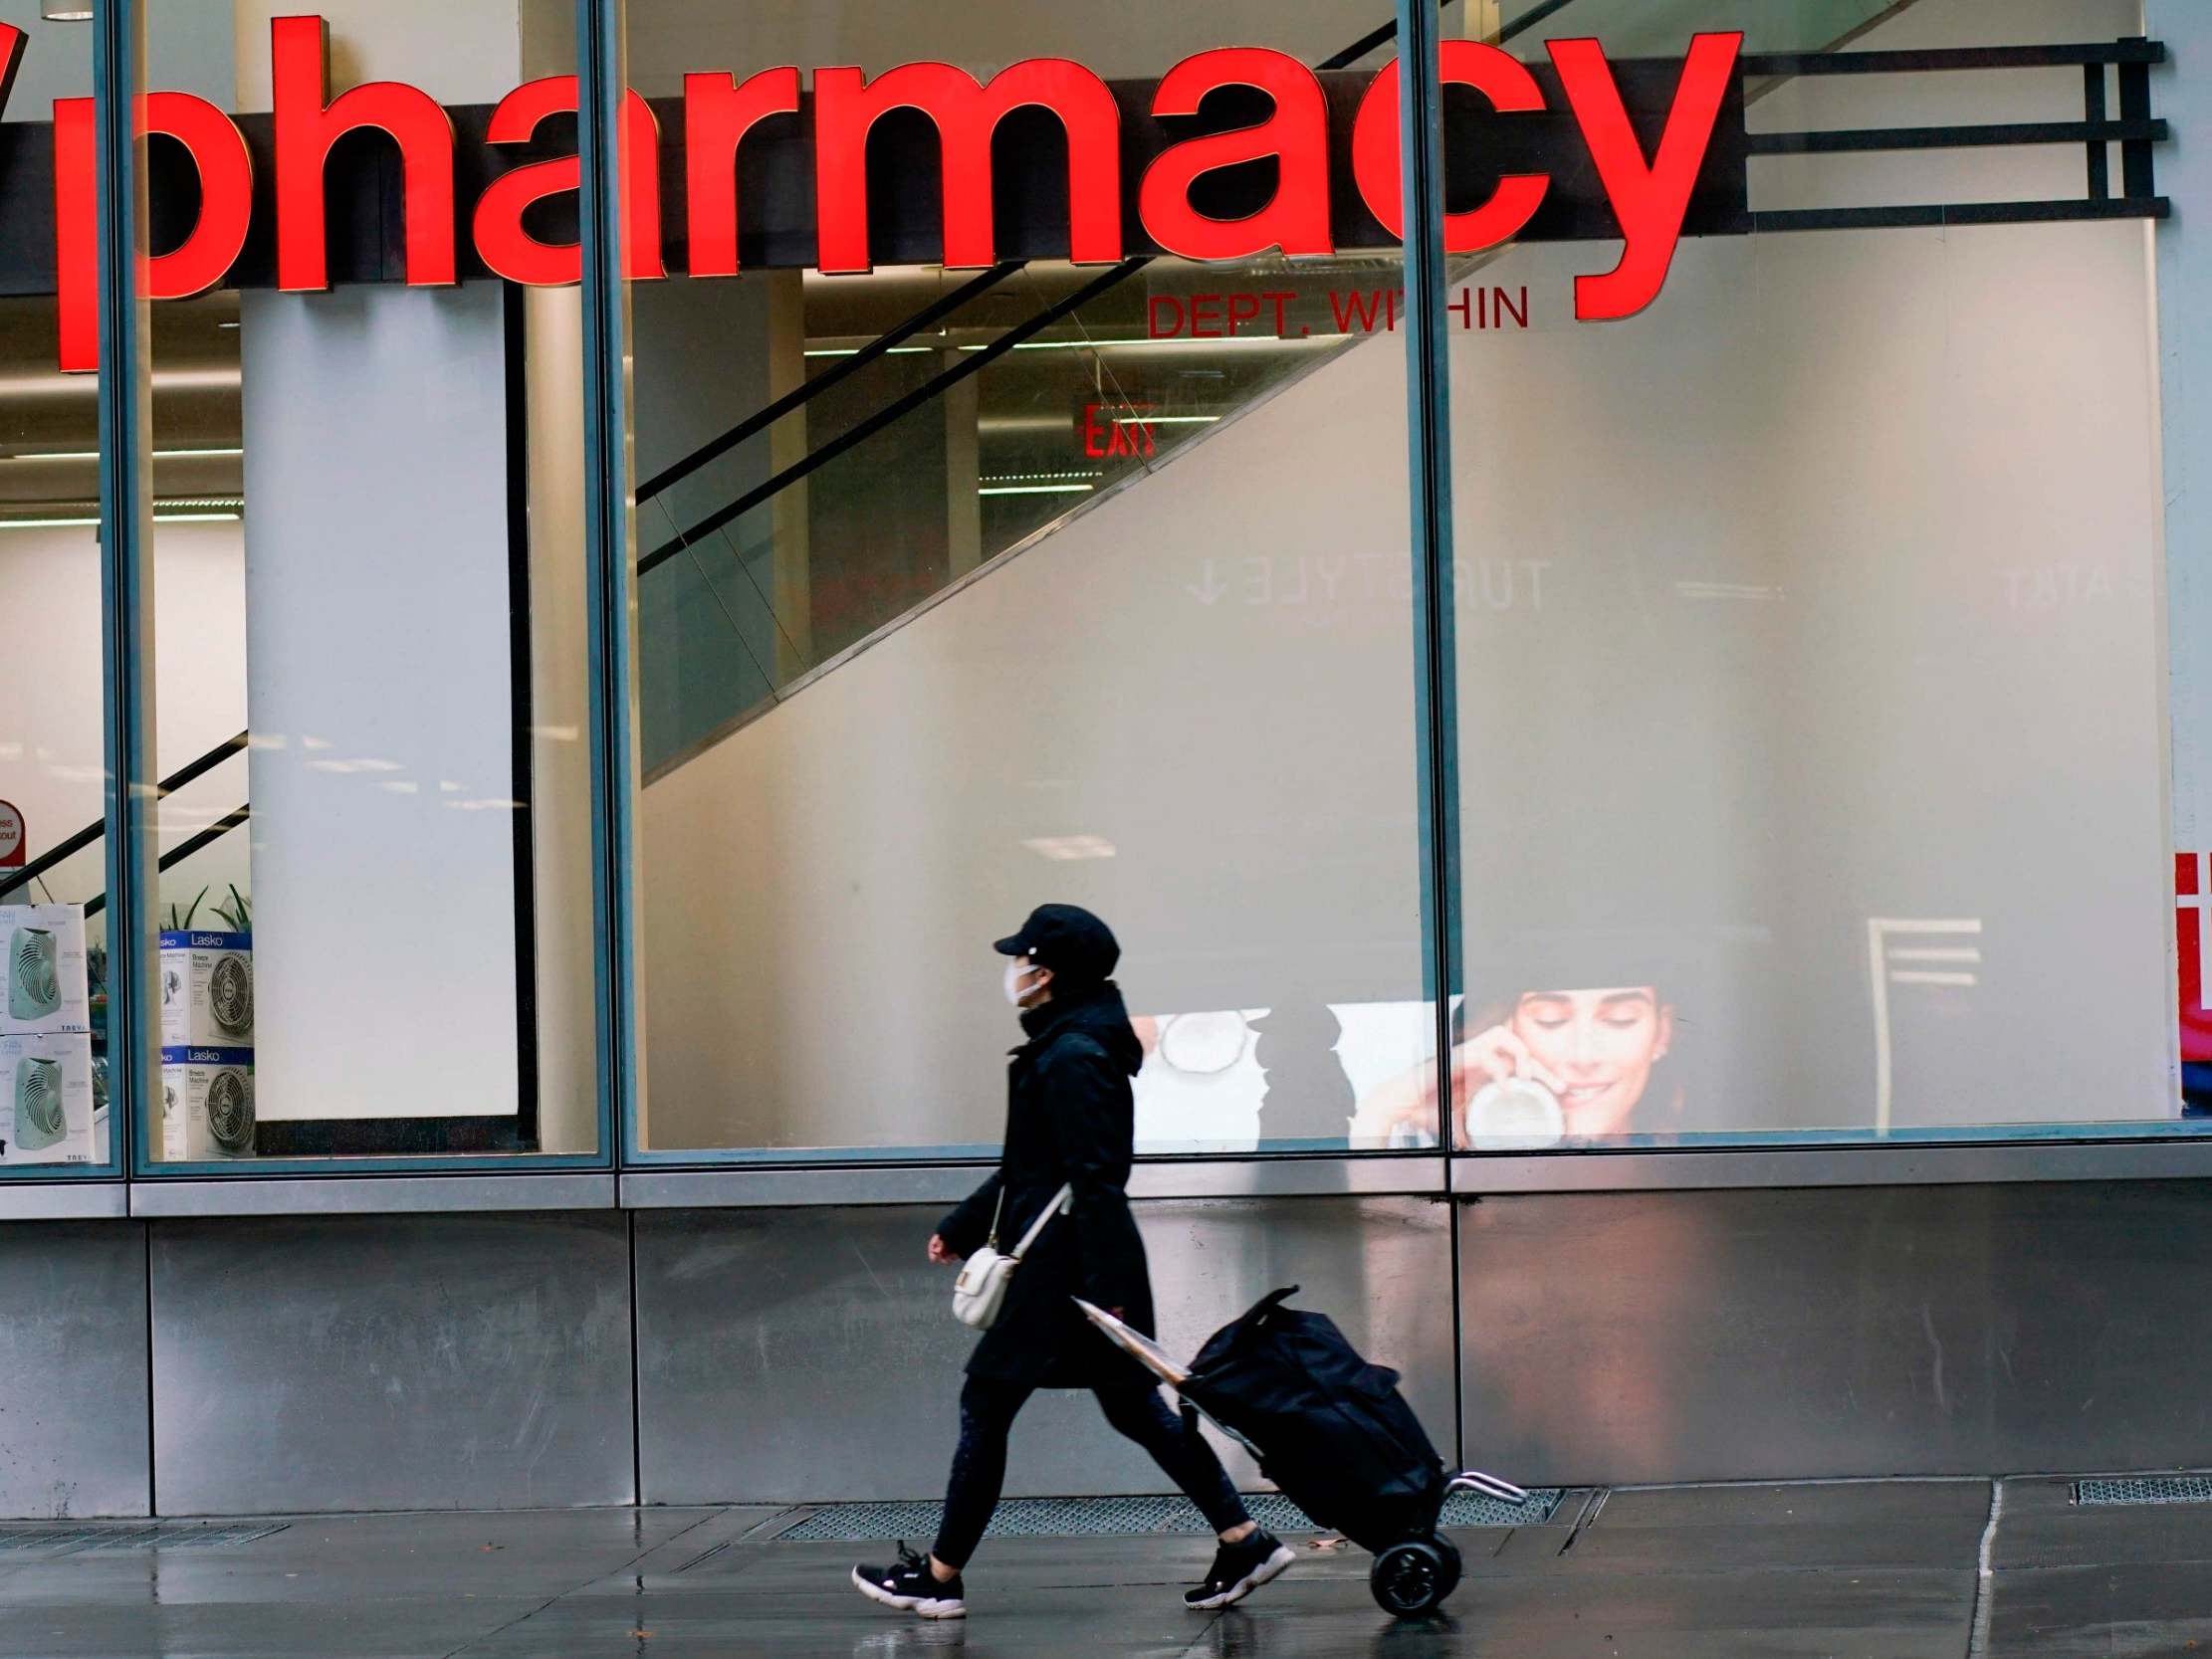 US pharmacies rarely will tell you ahead of time what they're going to charge for medication